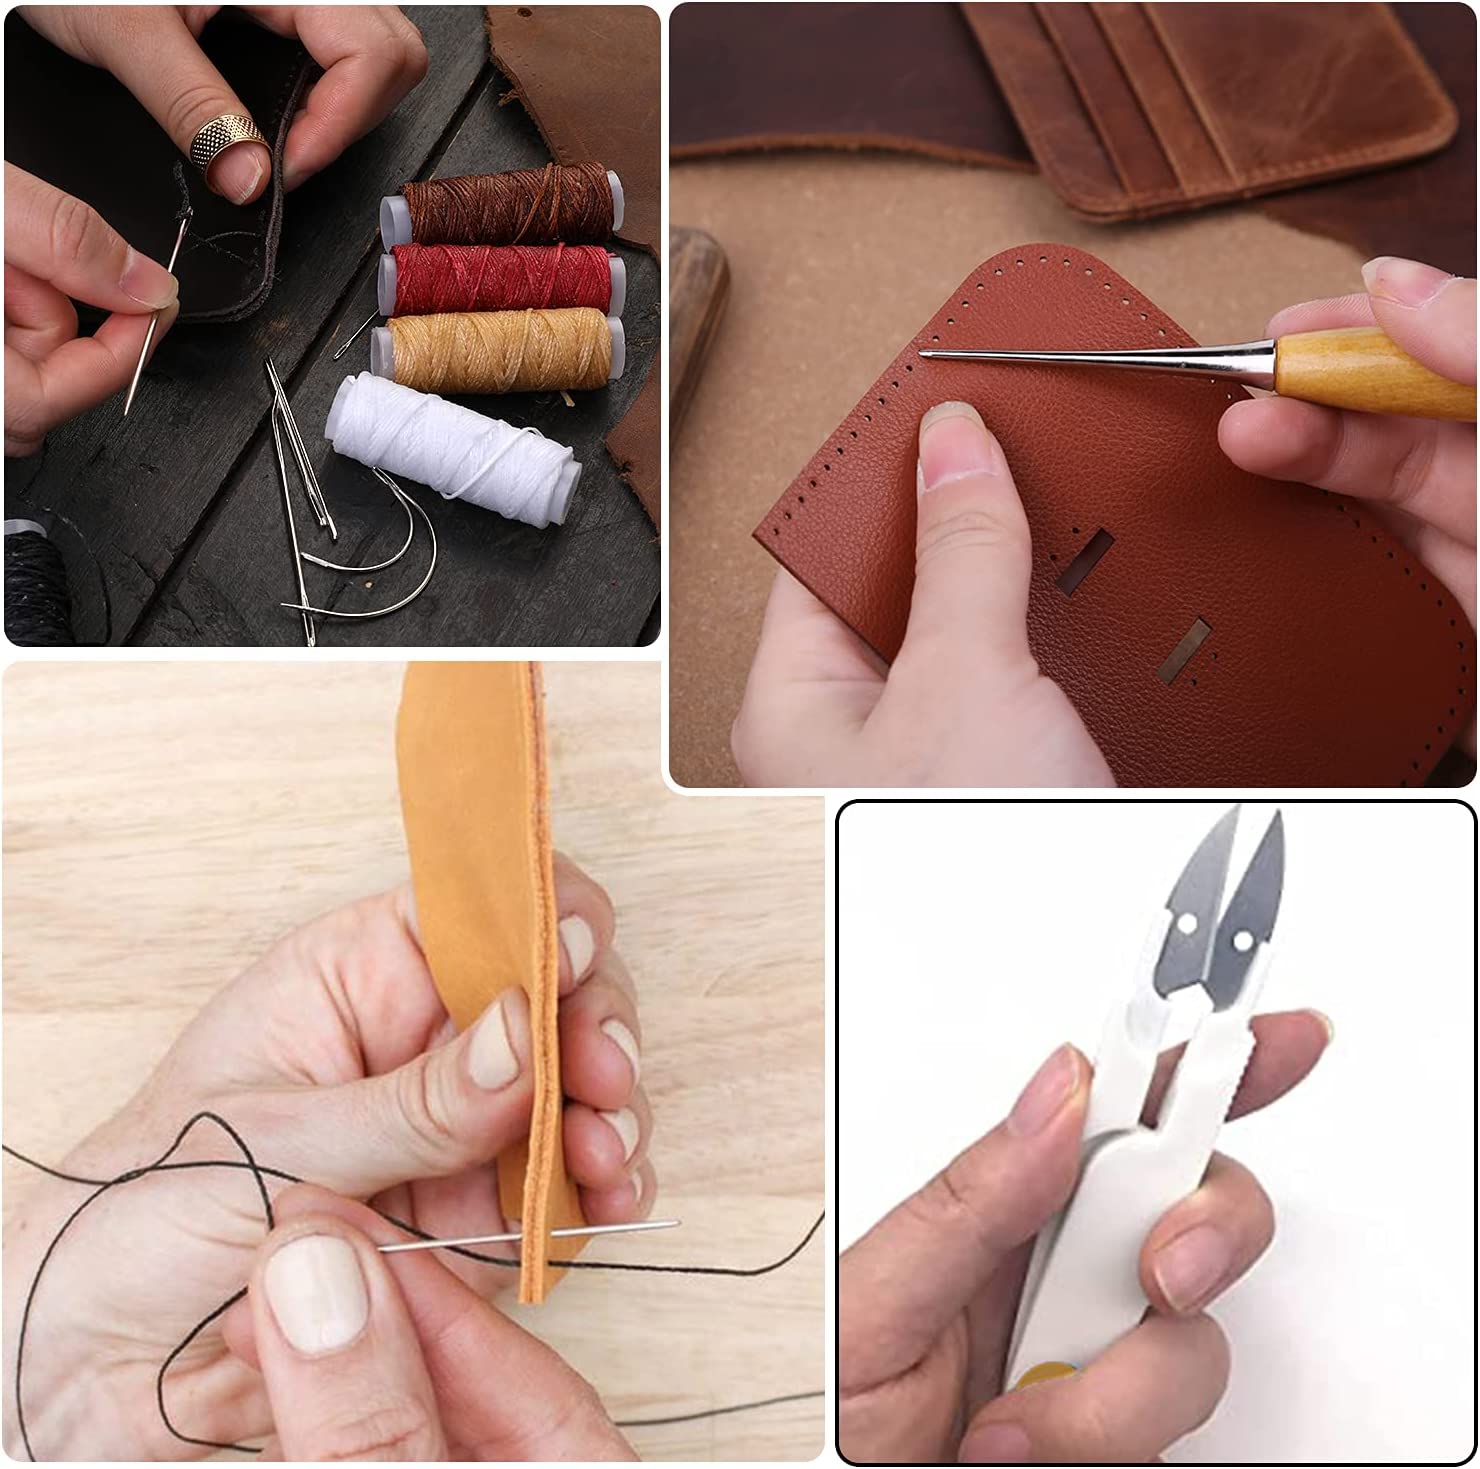 Upholstery Repair Sewing Kit Heavy Duty Sewing Kit with Sewing Awl, Seam  Ripper, Hand Sewing Stitching Needles, Sewing Thread, Leather Craft Tool  Kit for Shoes Sofa Tent Carpet Leather Craft DIY